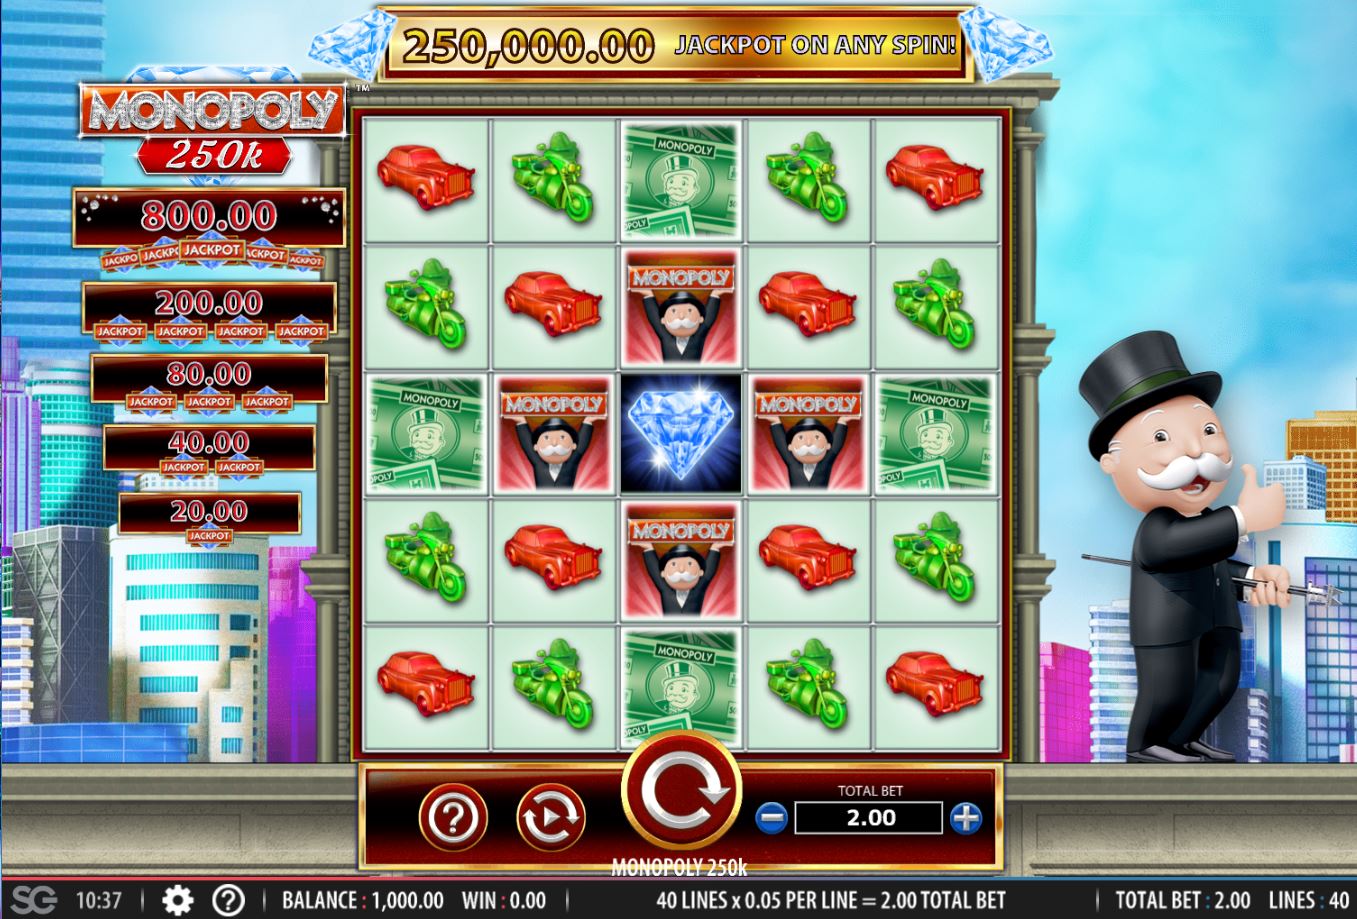 Monopoly 250k slot from Bally online freeplay game